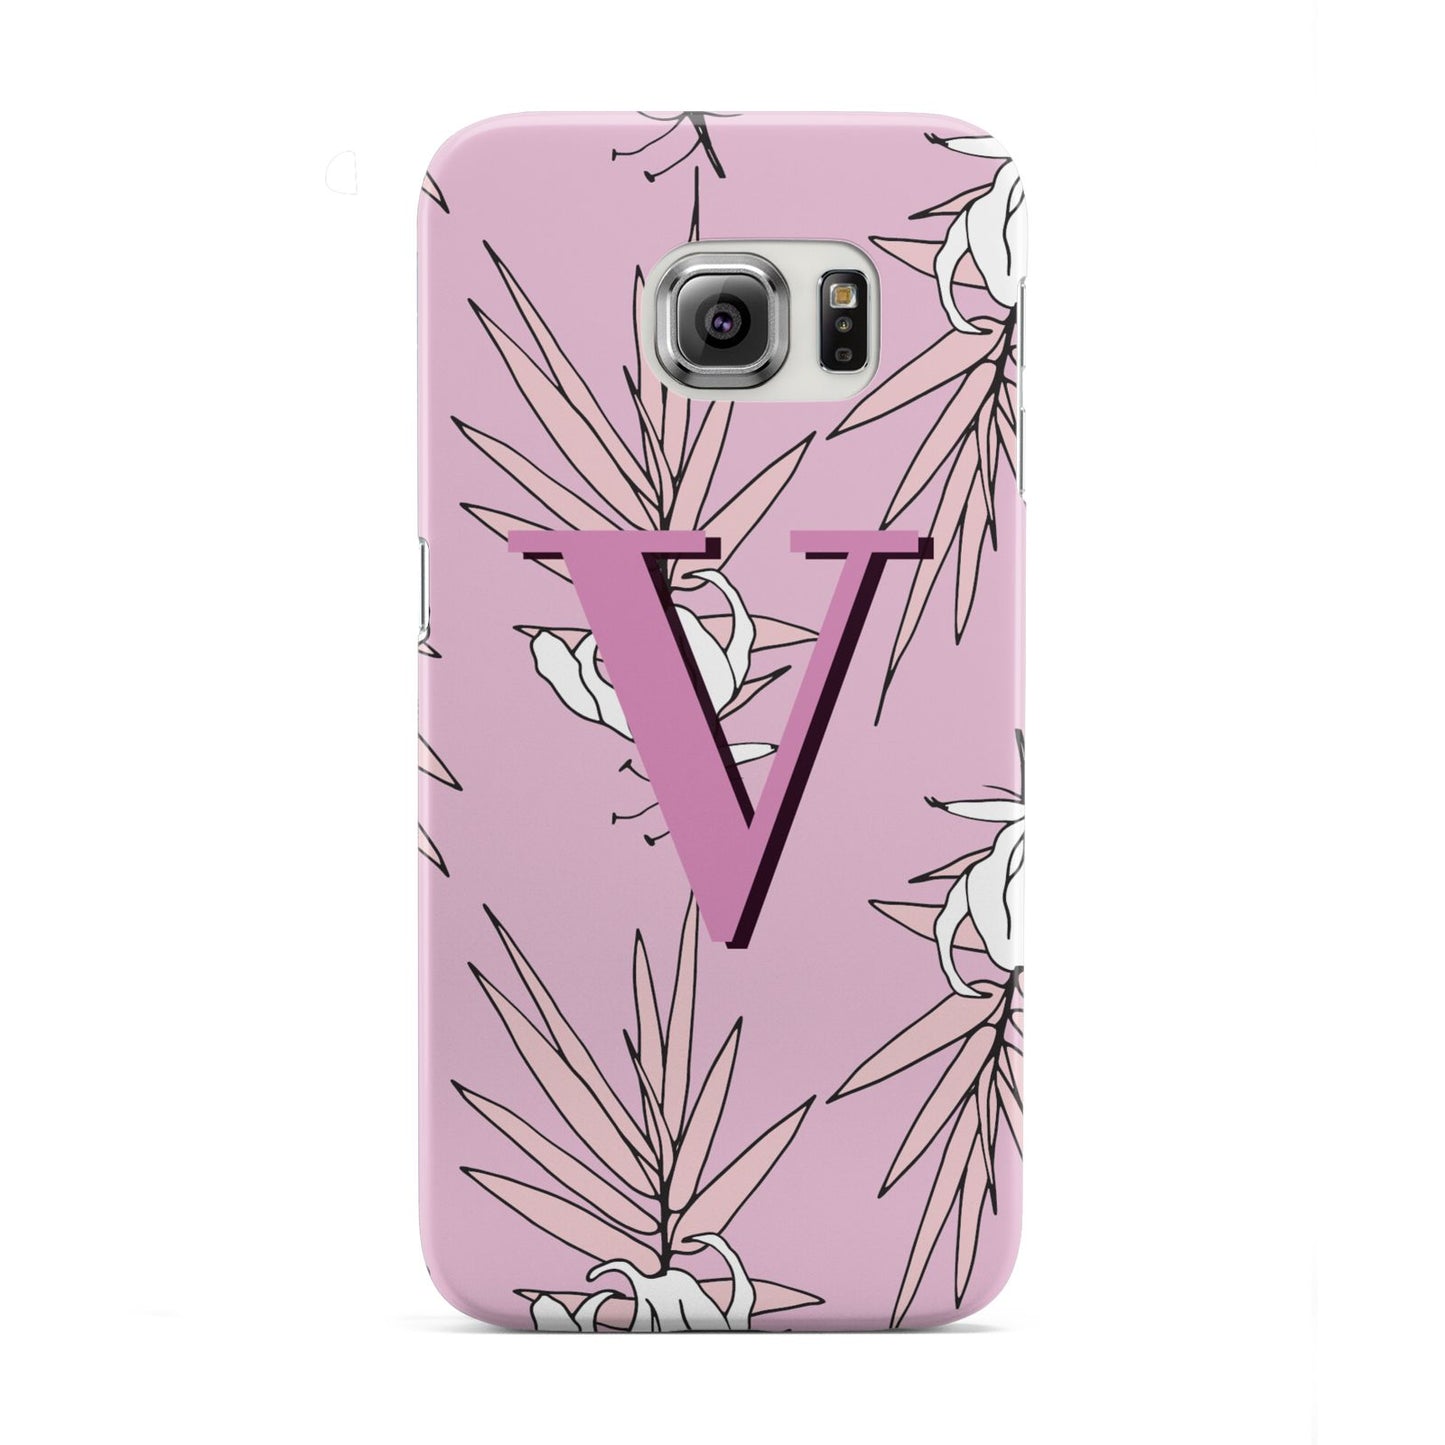 Personalised Pink and White Floral Monogram Samsung Galaxy S6 Edge Case